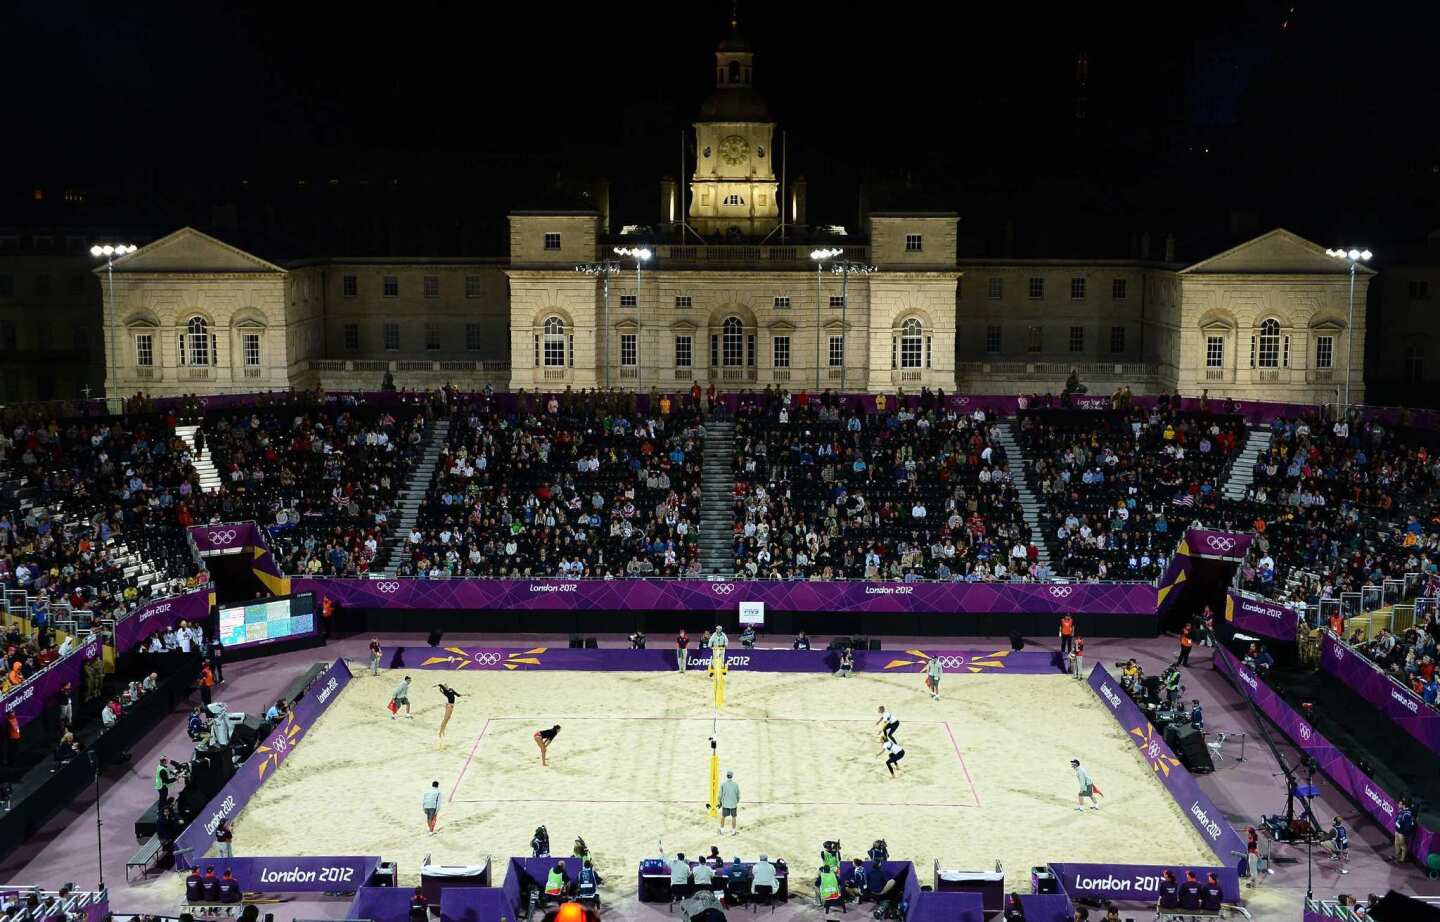 The U.S. women's team of Misty May-Treanor and Kerri Walsh challenge Australia's Nat Cook and Tamsin Hinchley during a beach volleyball event at the Horse Guards Parade and 10 Downing Street, the home of the British prime minister.